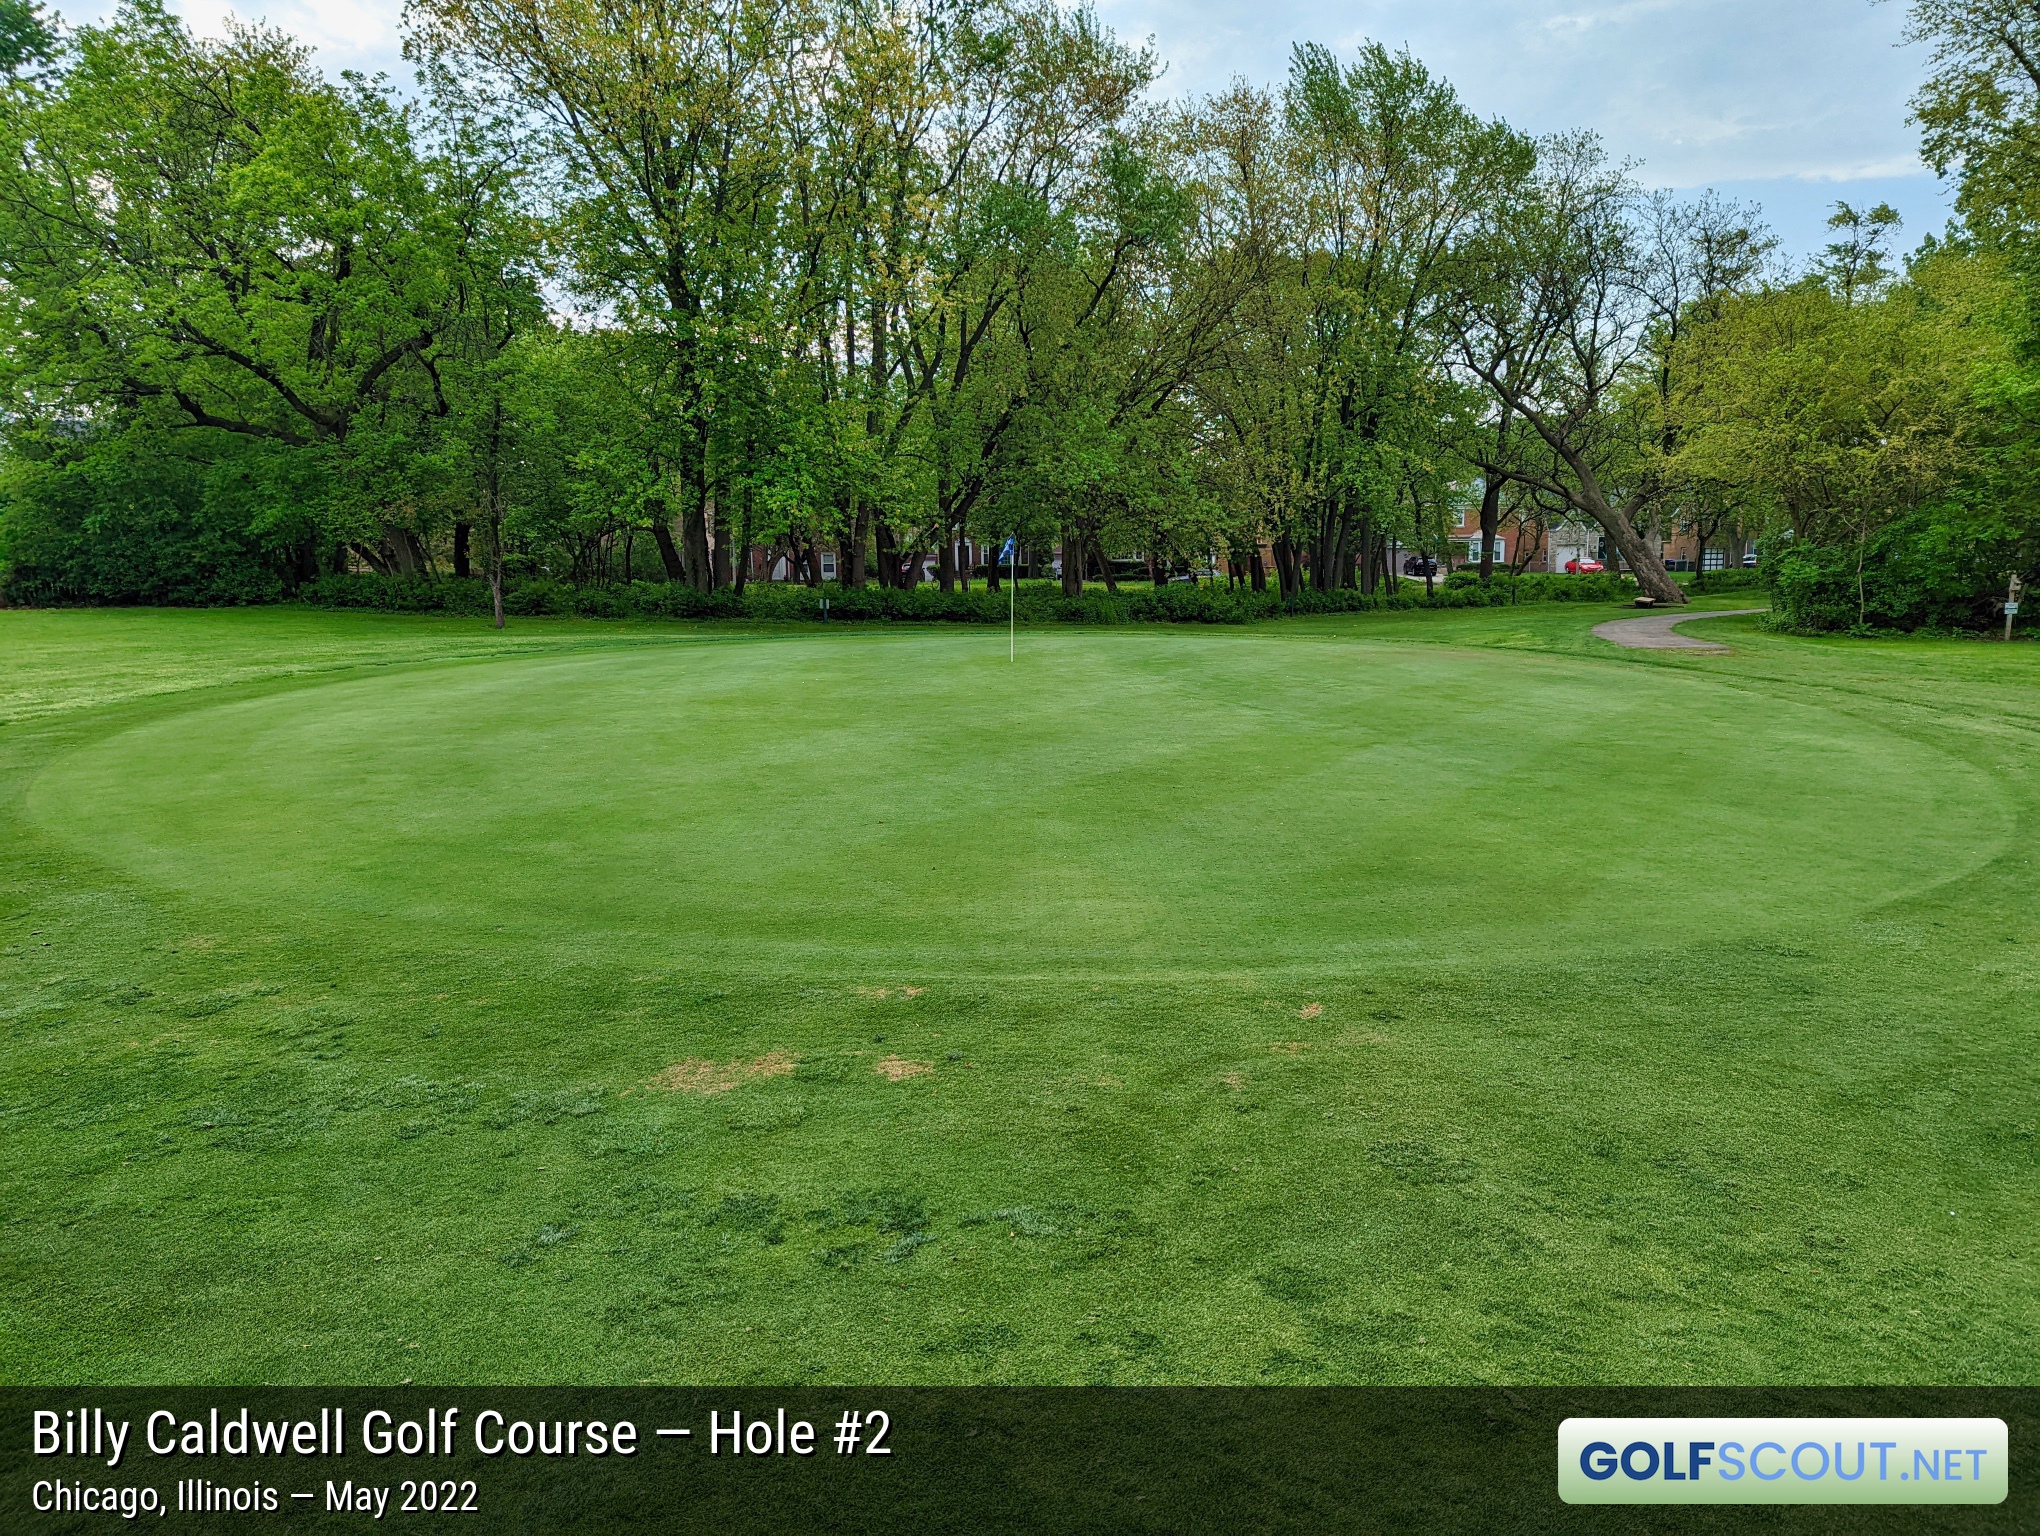 Photo of hole #2 at Billy Caldwell Golf Course in Chicago, Illinois. 